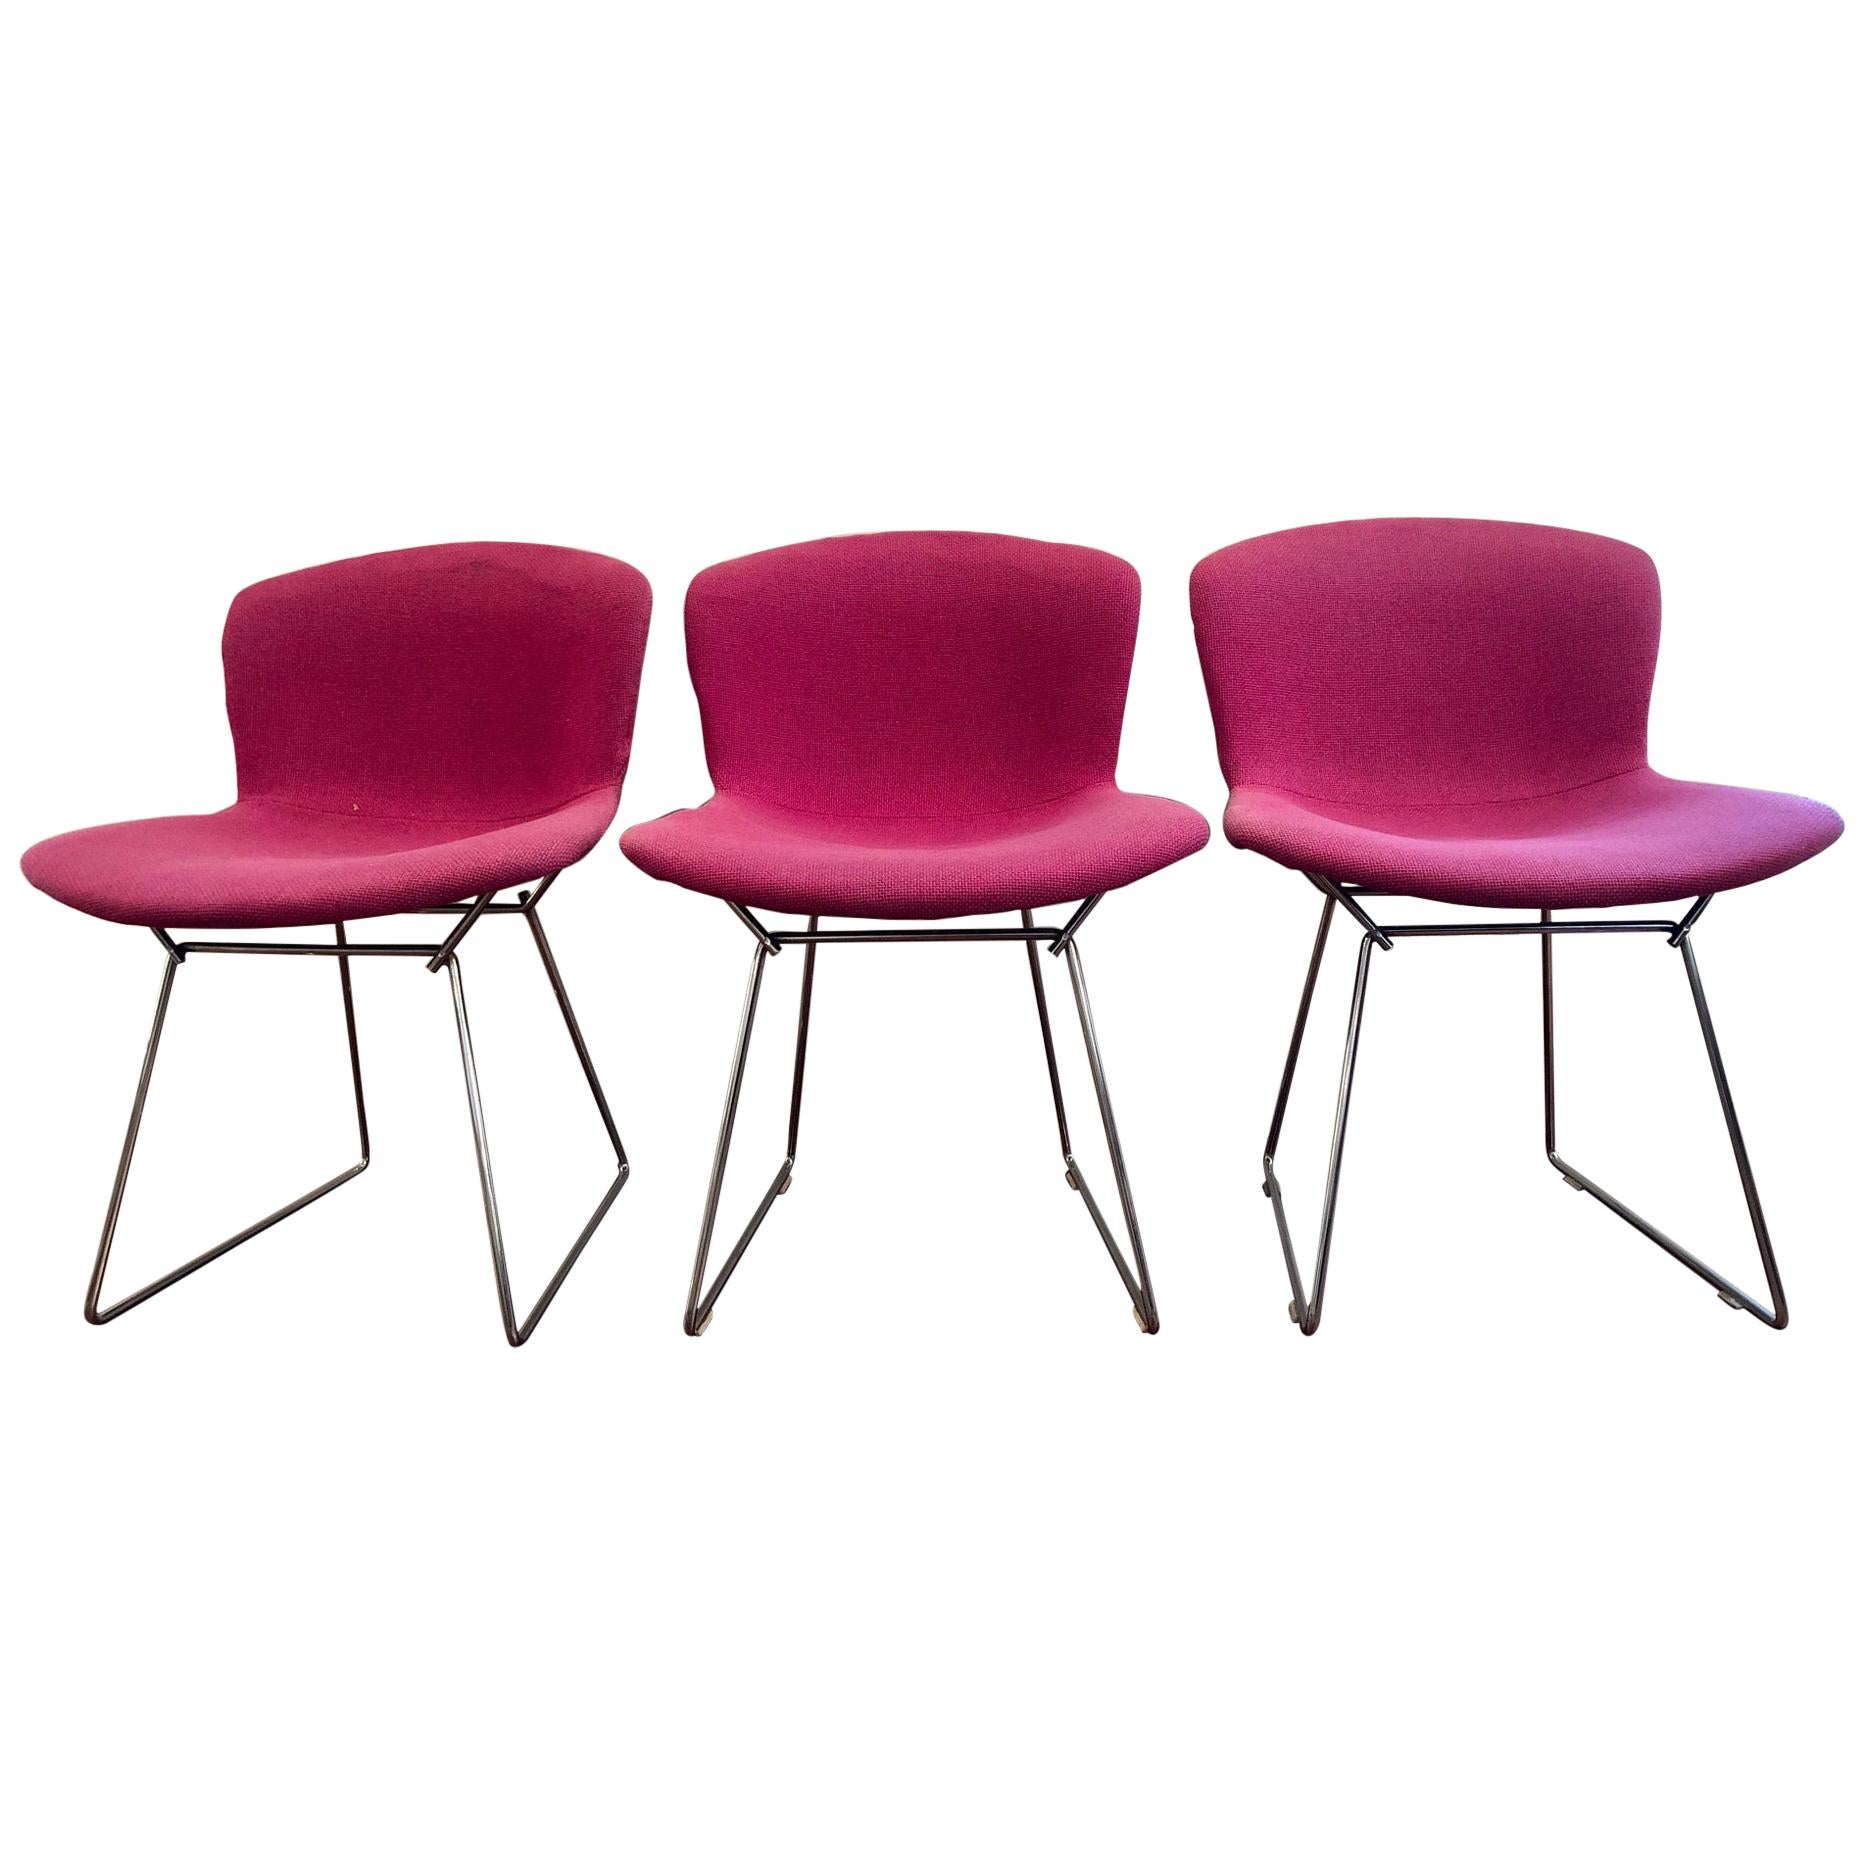 Set of 3 Harry Bertoia Wire Chairs for Knoll International, circa 1950